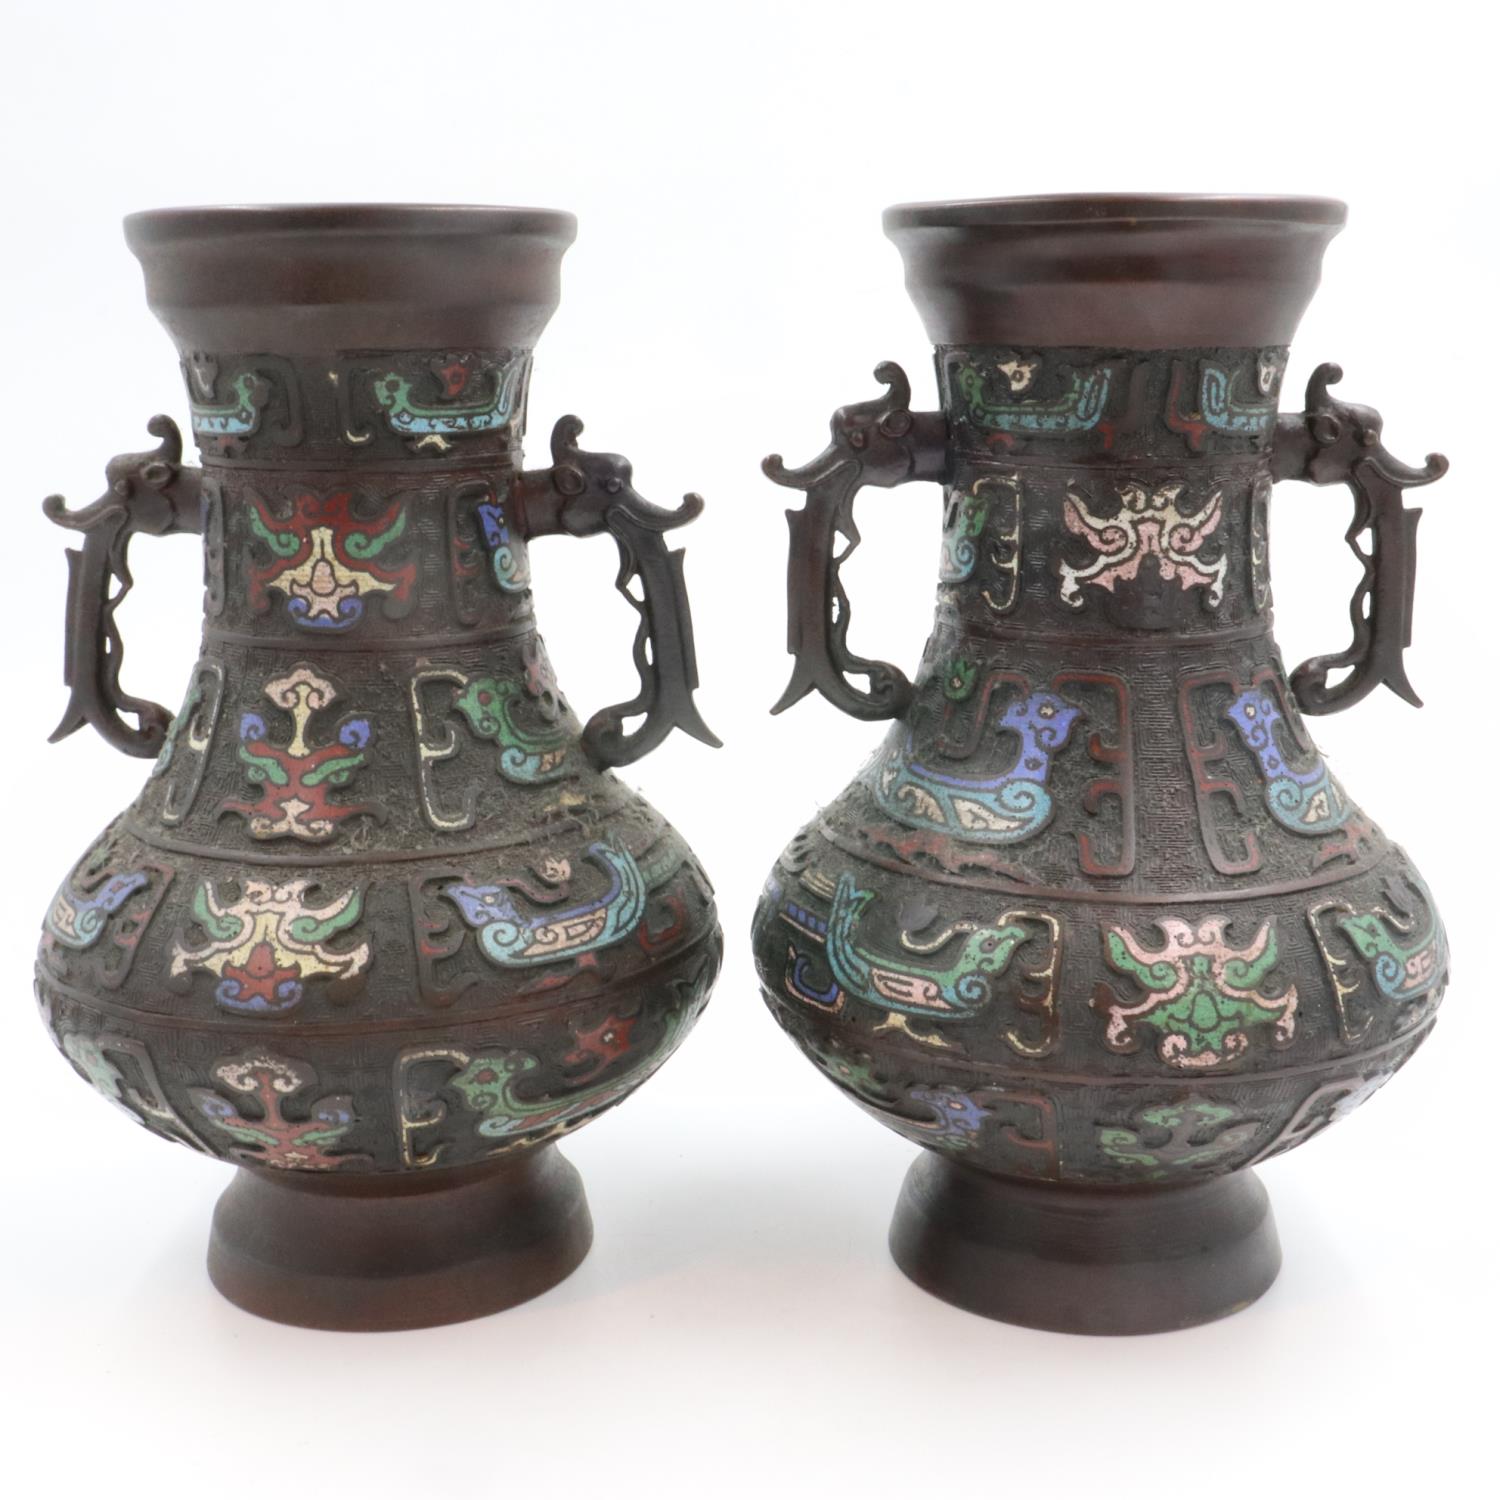 Two bronze enamelled vases, H: 31 cm. Not available for in-house P&P